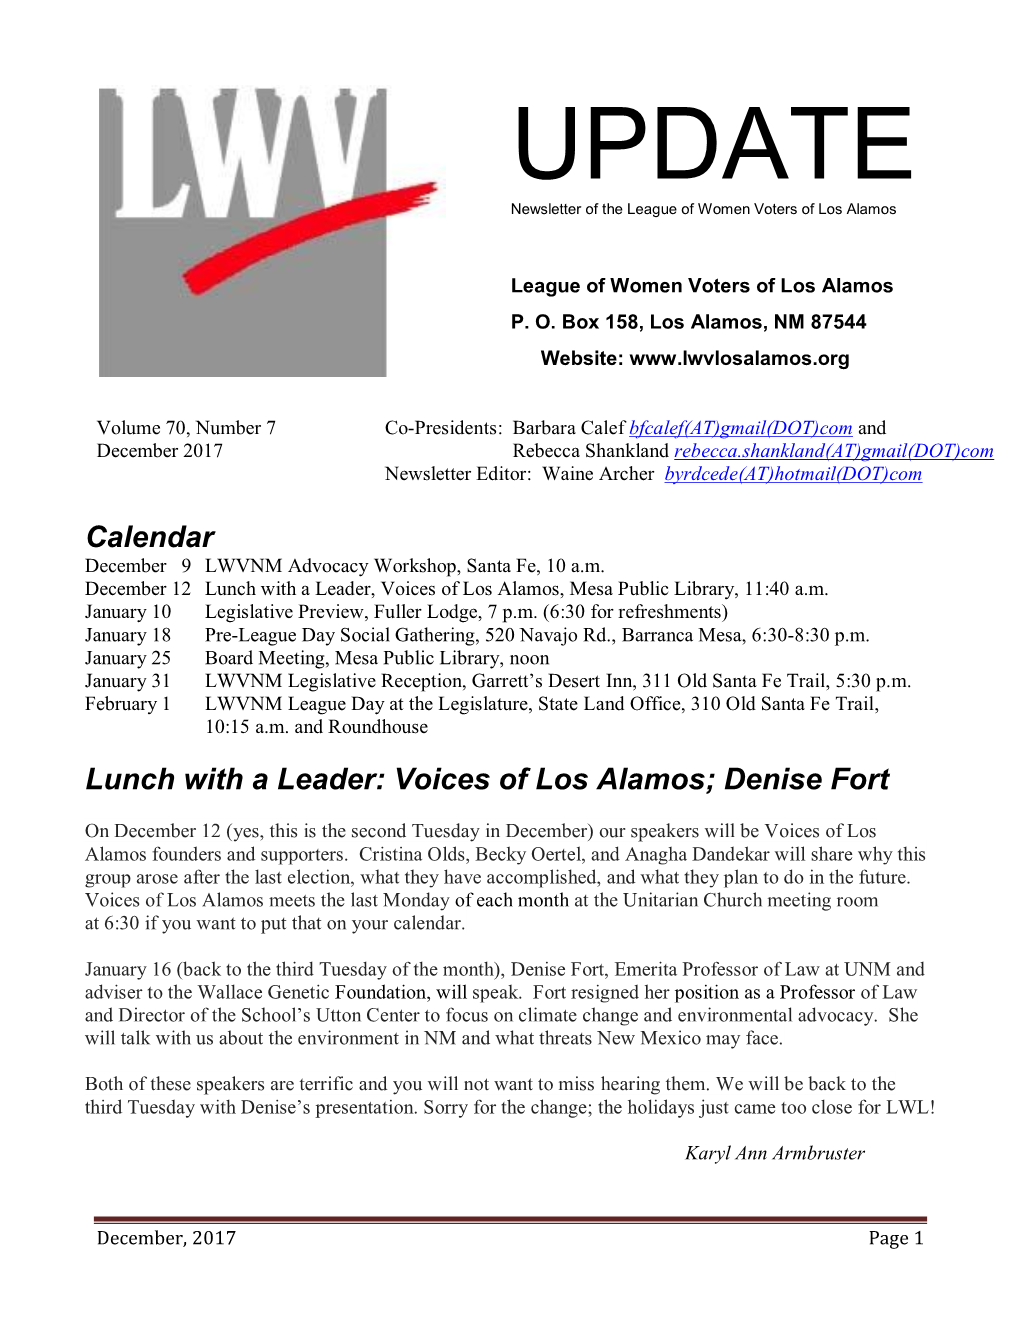 UPDATE Newsletter of the League of Women Voters of Los Alamos